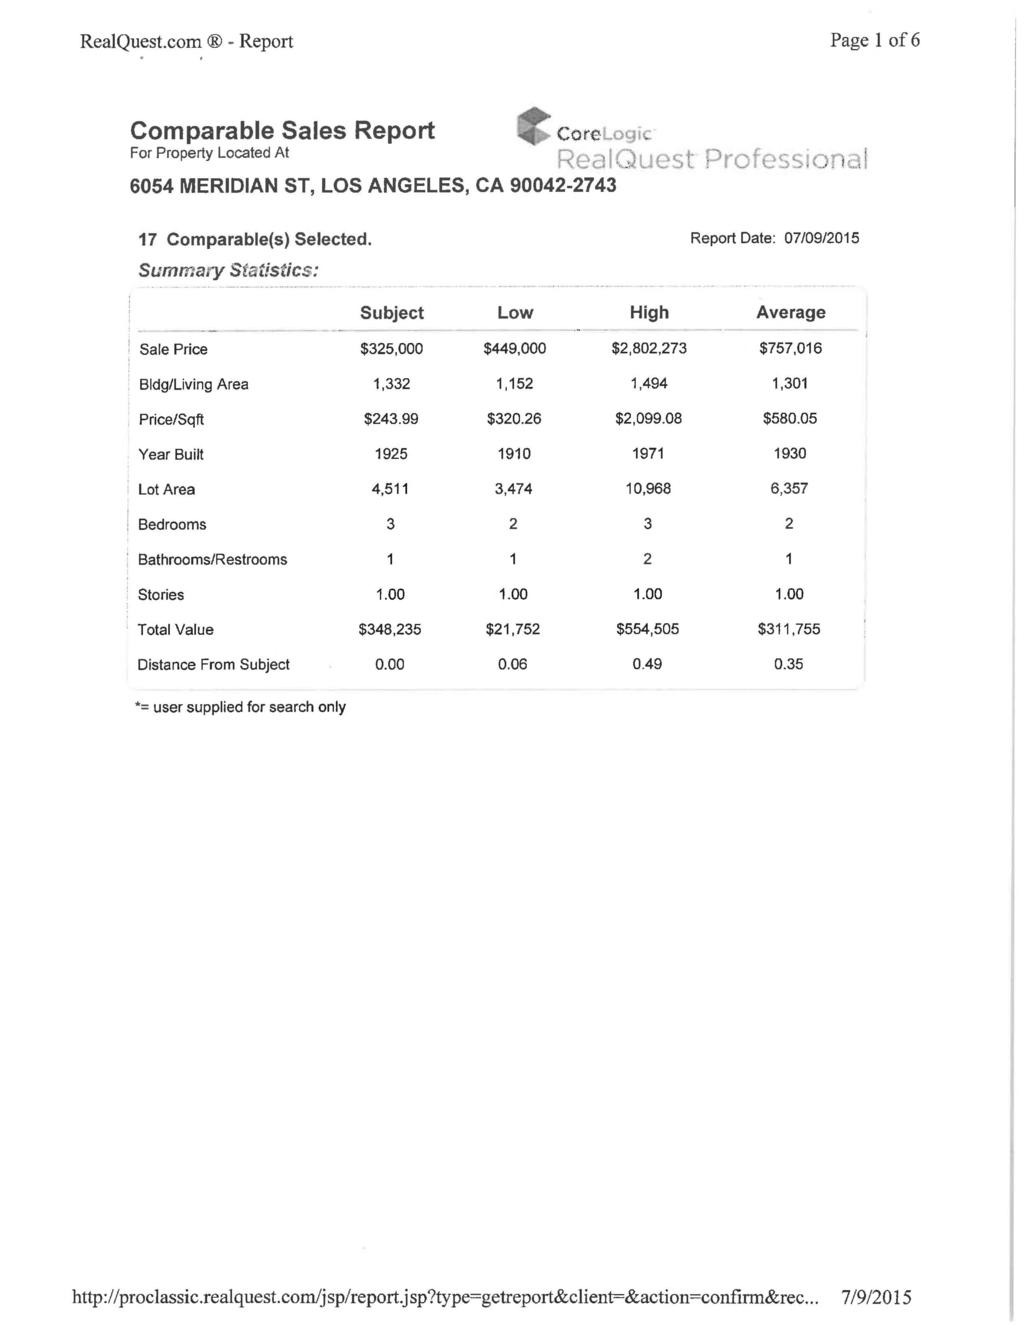 RealQuest.com - Report Page 1 of 6 Comparable Sales Report For Property Located At ^ CoreLogic 64 MERIDIAN ST, 94-74 RealQuest Professional 17 Comparable(s) Selected.